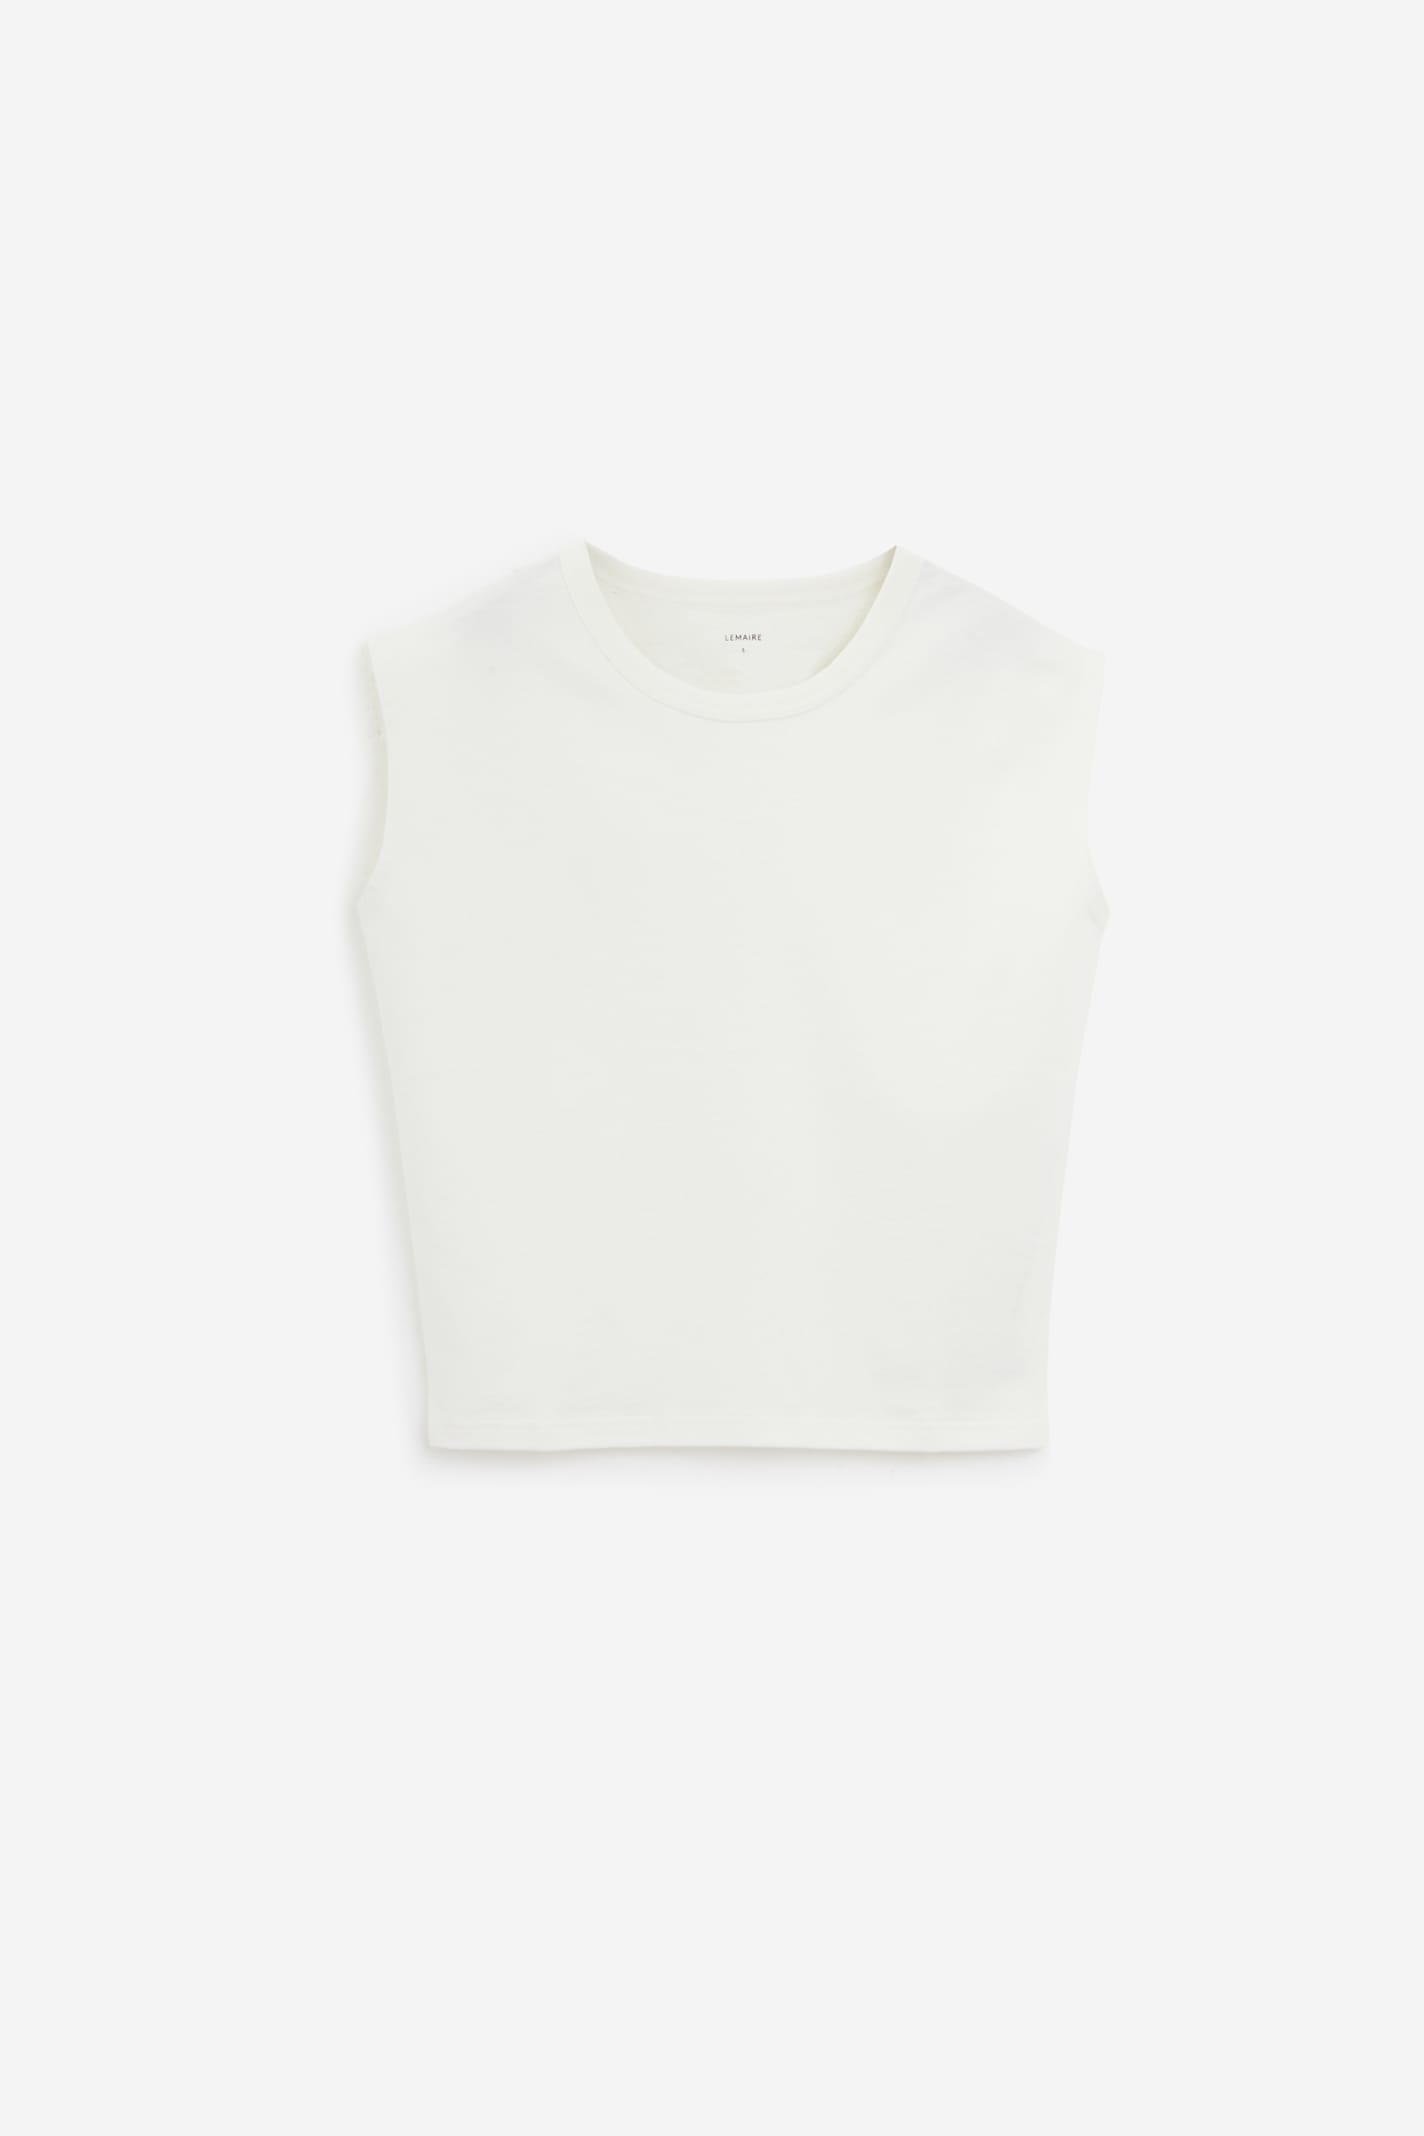 Shop Lemaire Cap Sleeve T-shirt In White